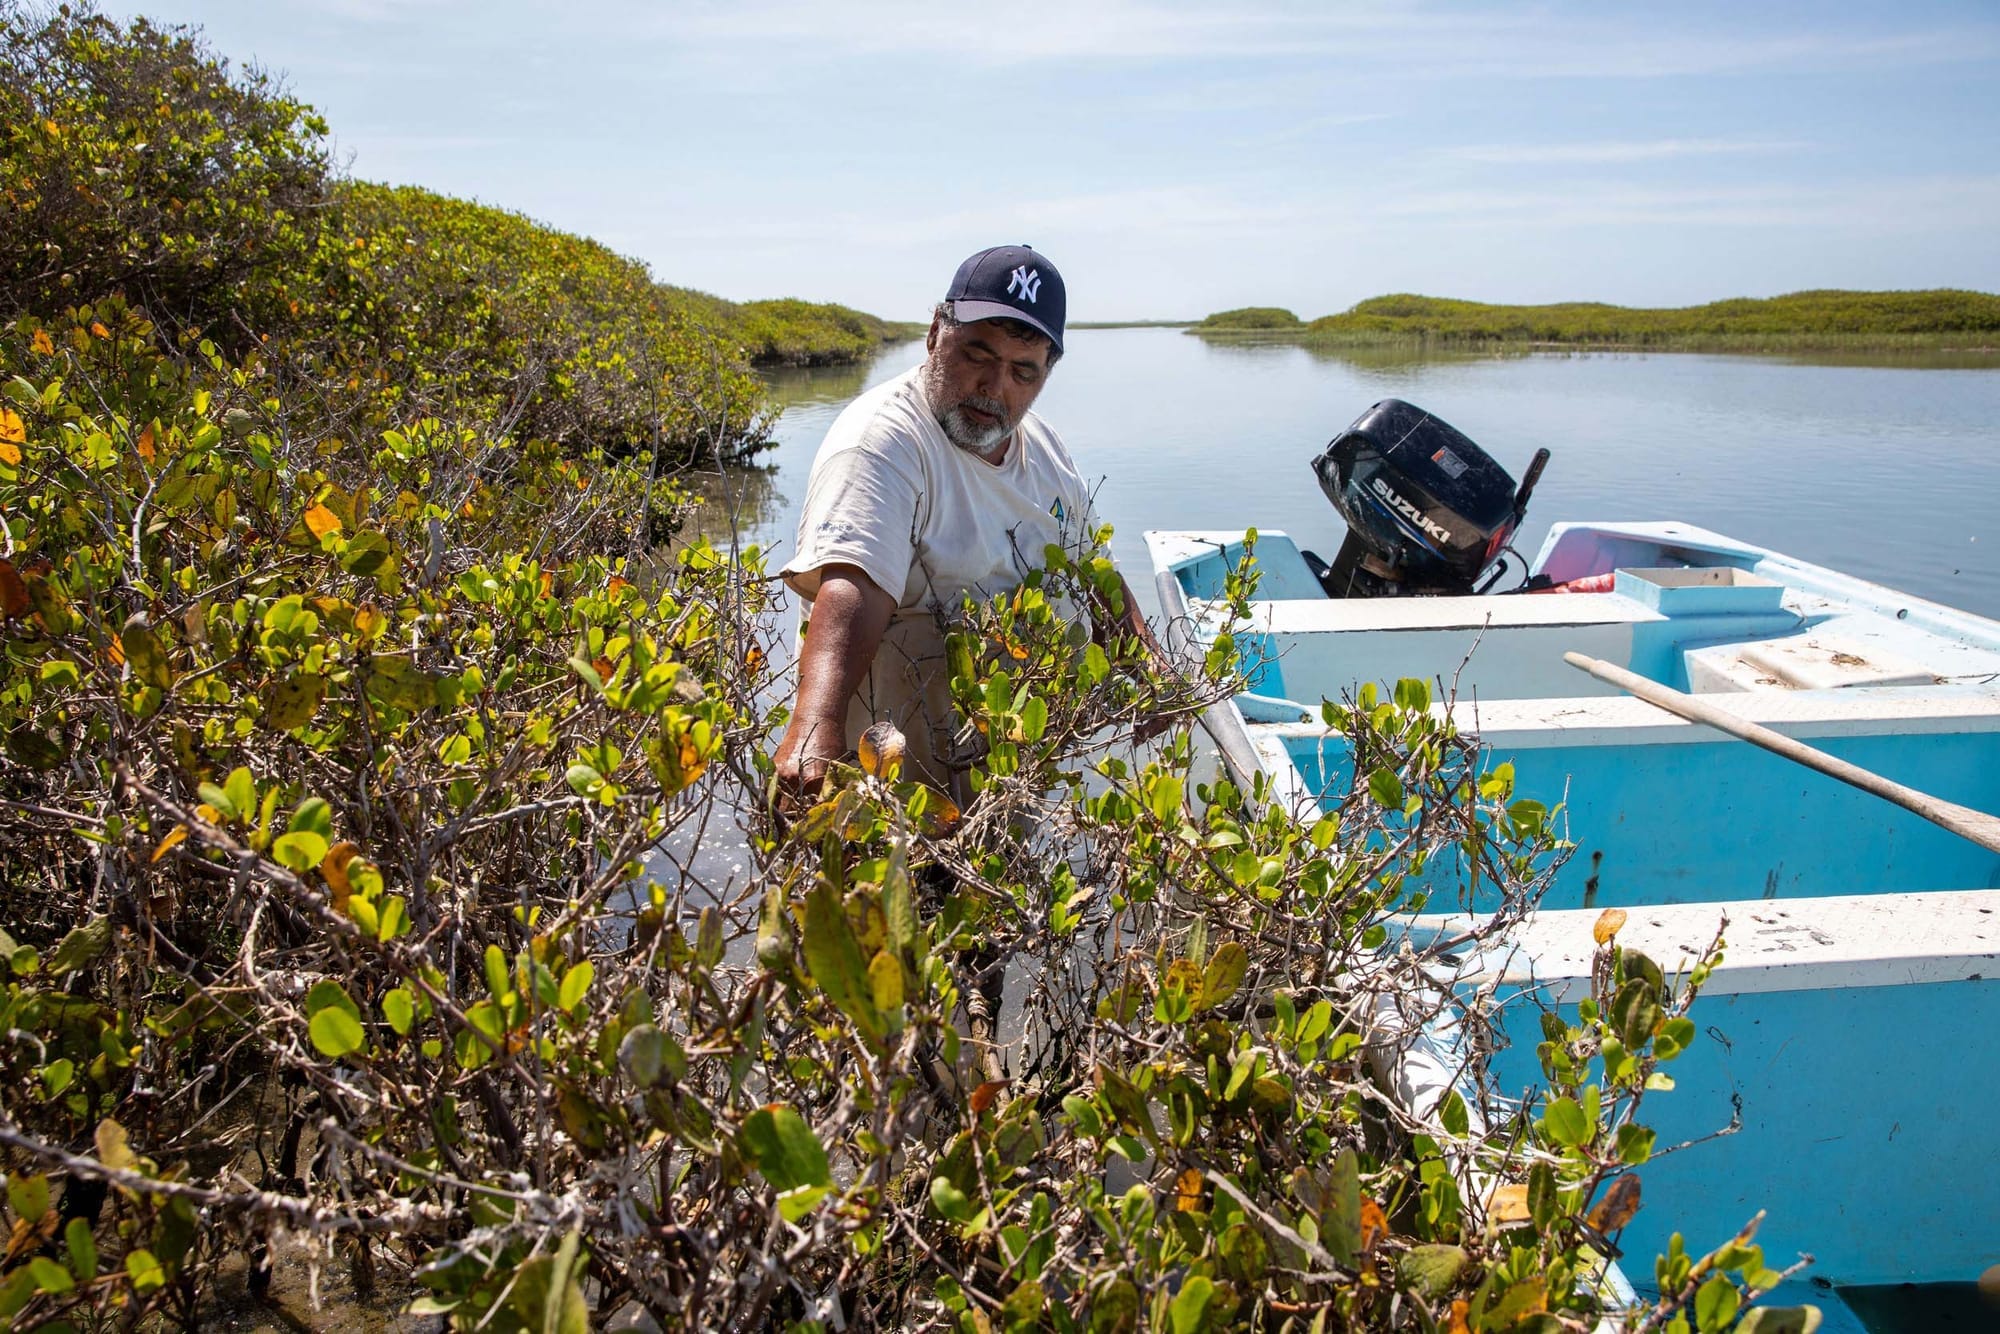 A person pointing at mangroves, standing next to a boat in a coastal scene